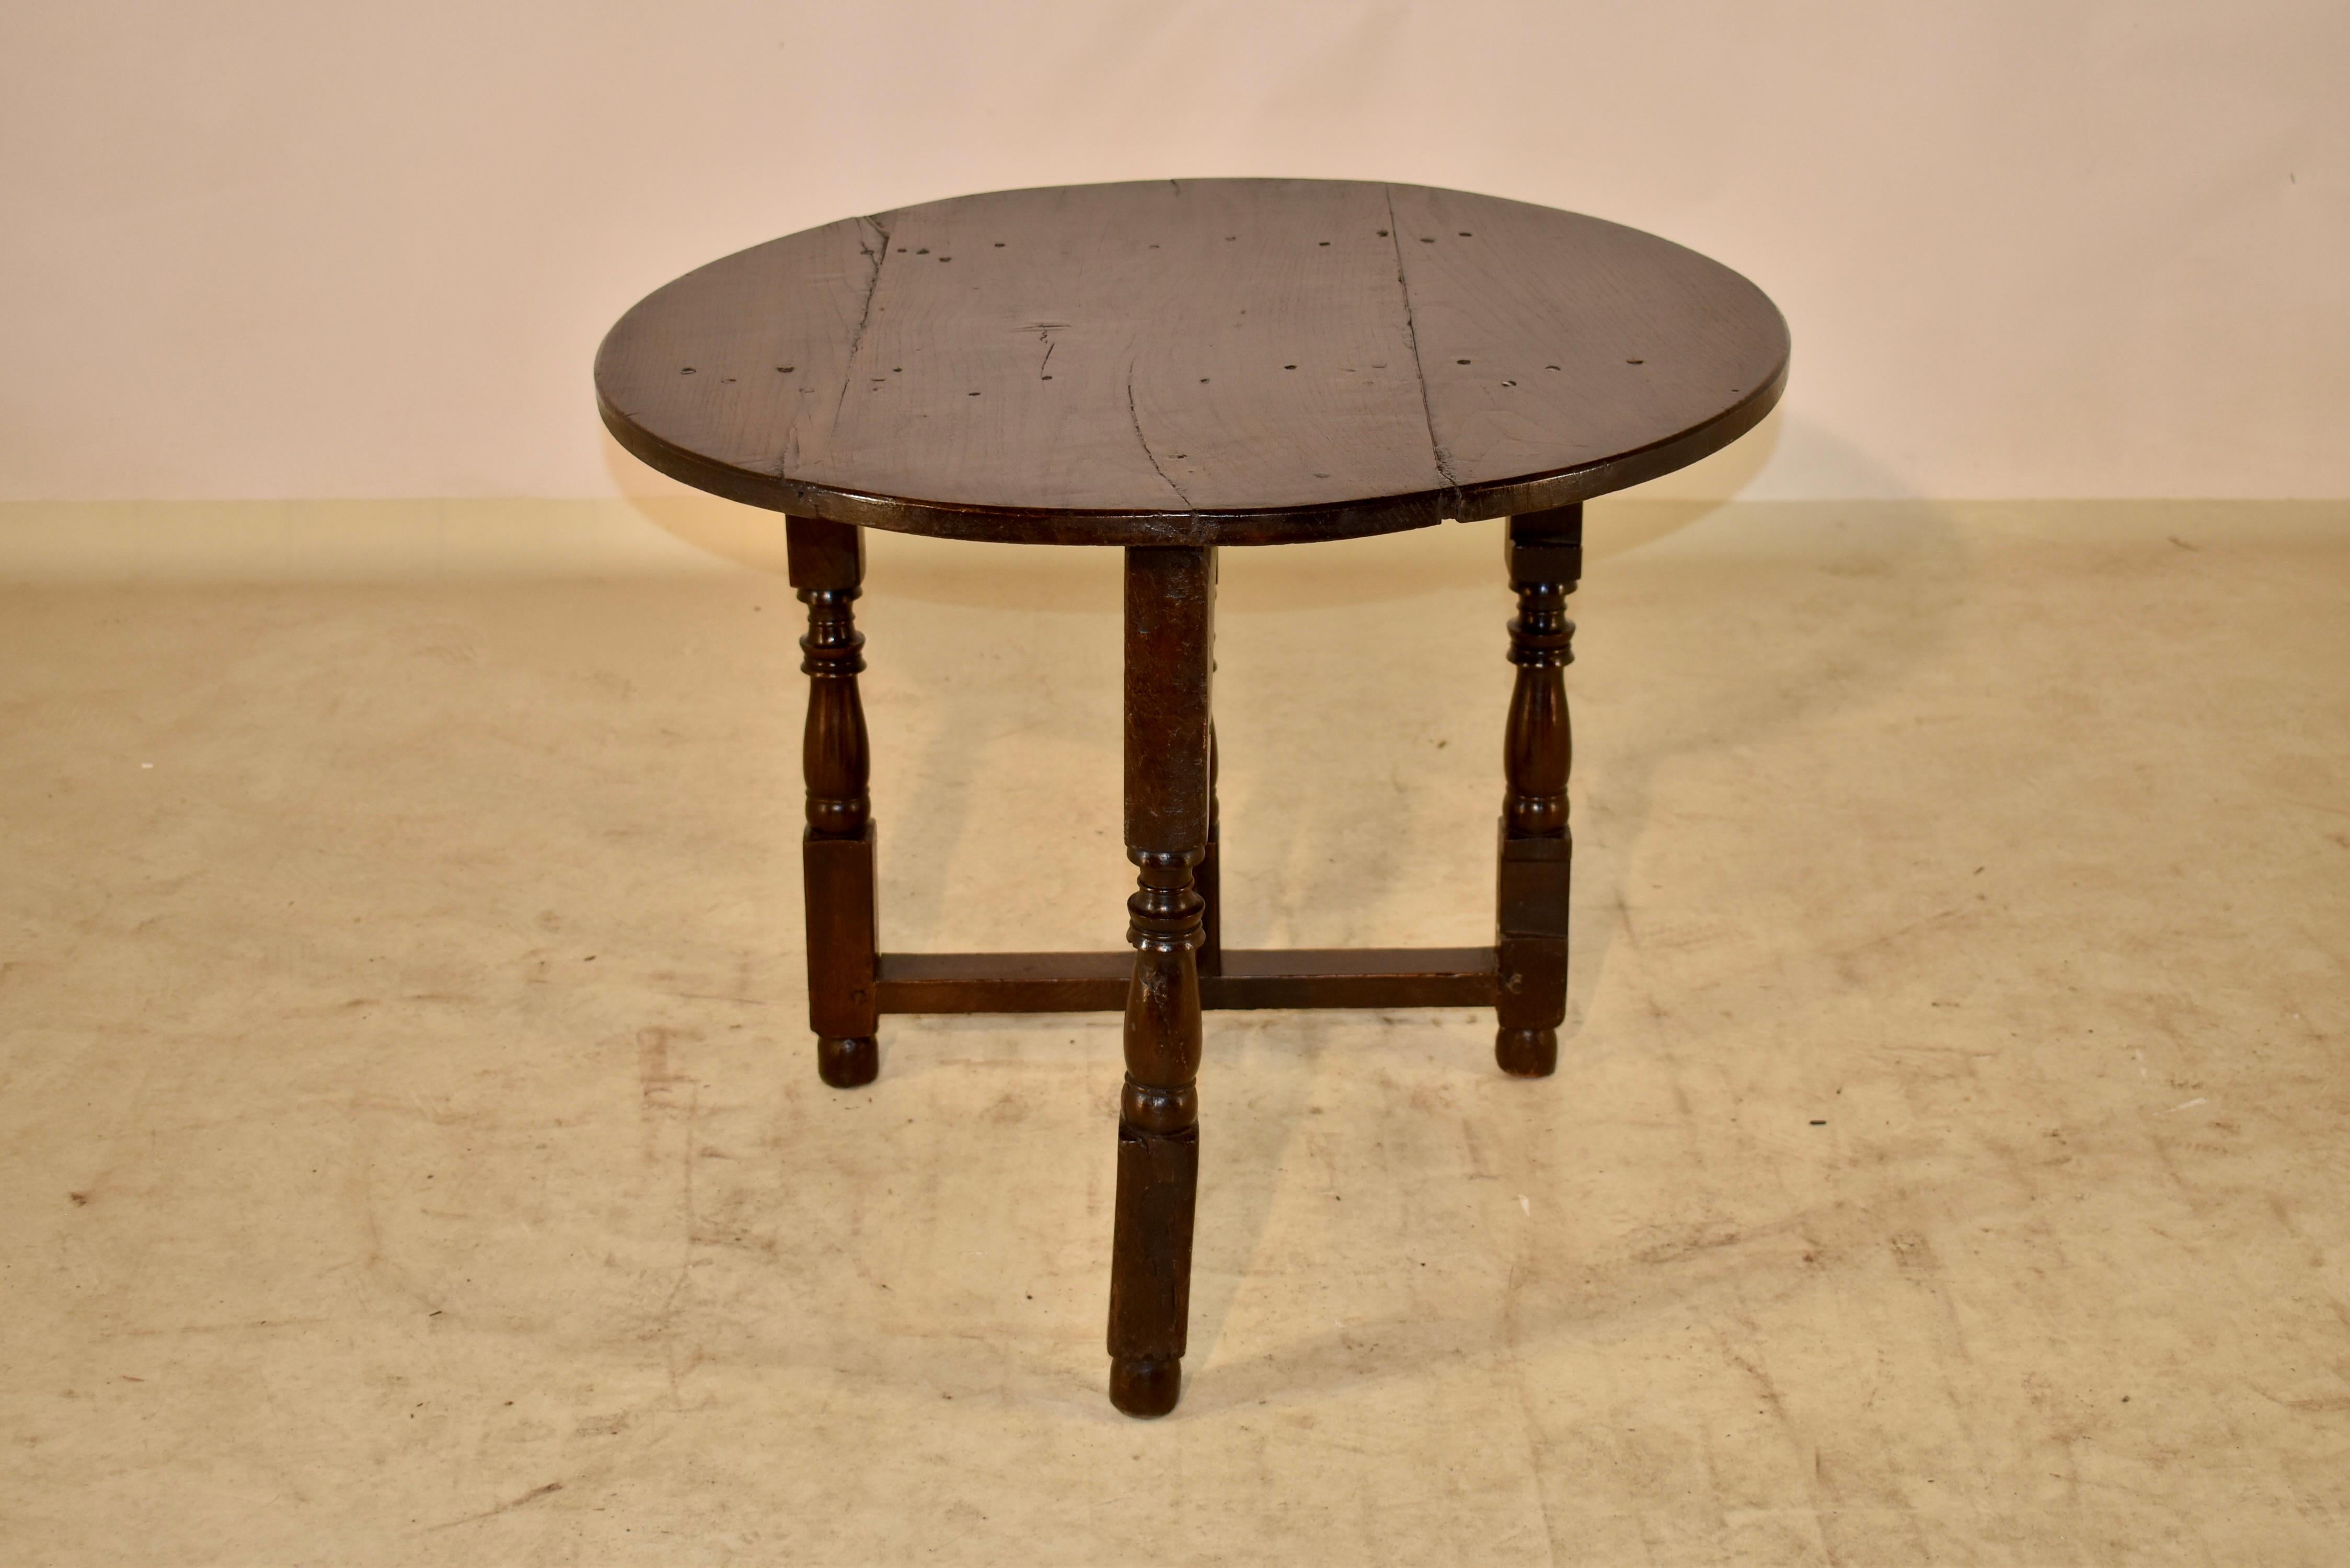 17th Century oak folding table from England with pegged construction on the well worn and patinated top. The top is supported on a base with hand turned legs, joined by simple stretchers and a single gate leg that swings out and allows the table top